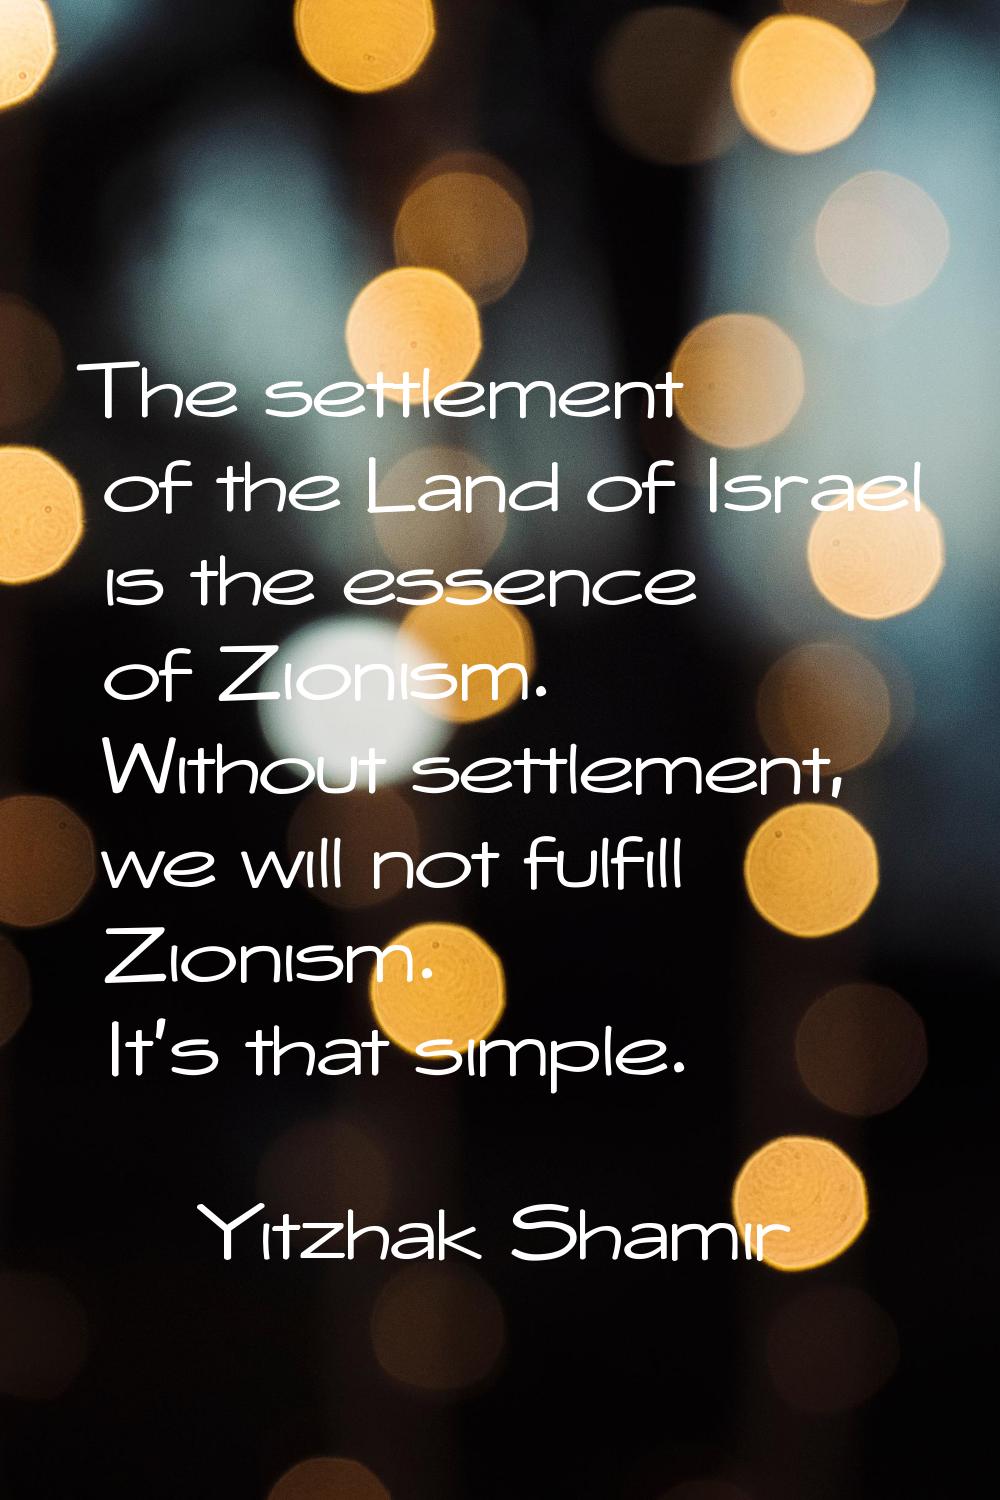 The settlement of the Land of Israel is the essence of Zionism. Without settlement, we will not ful